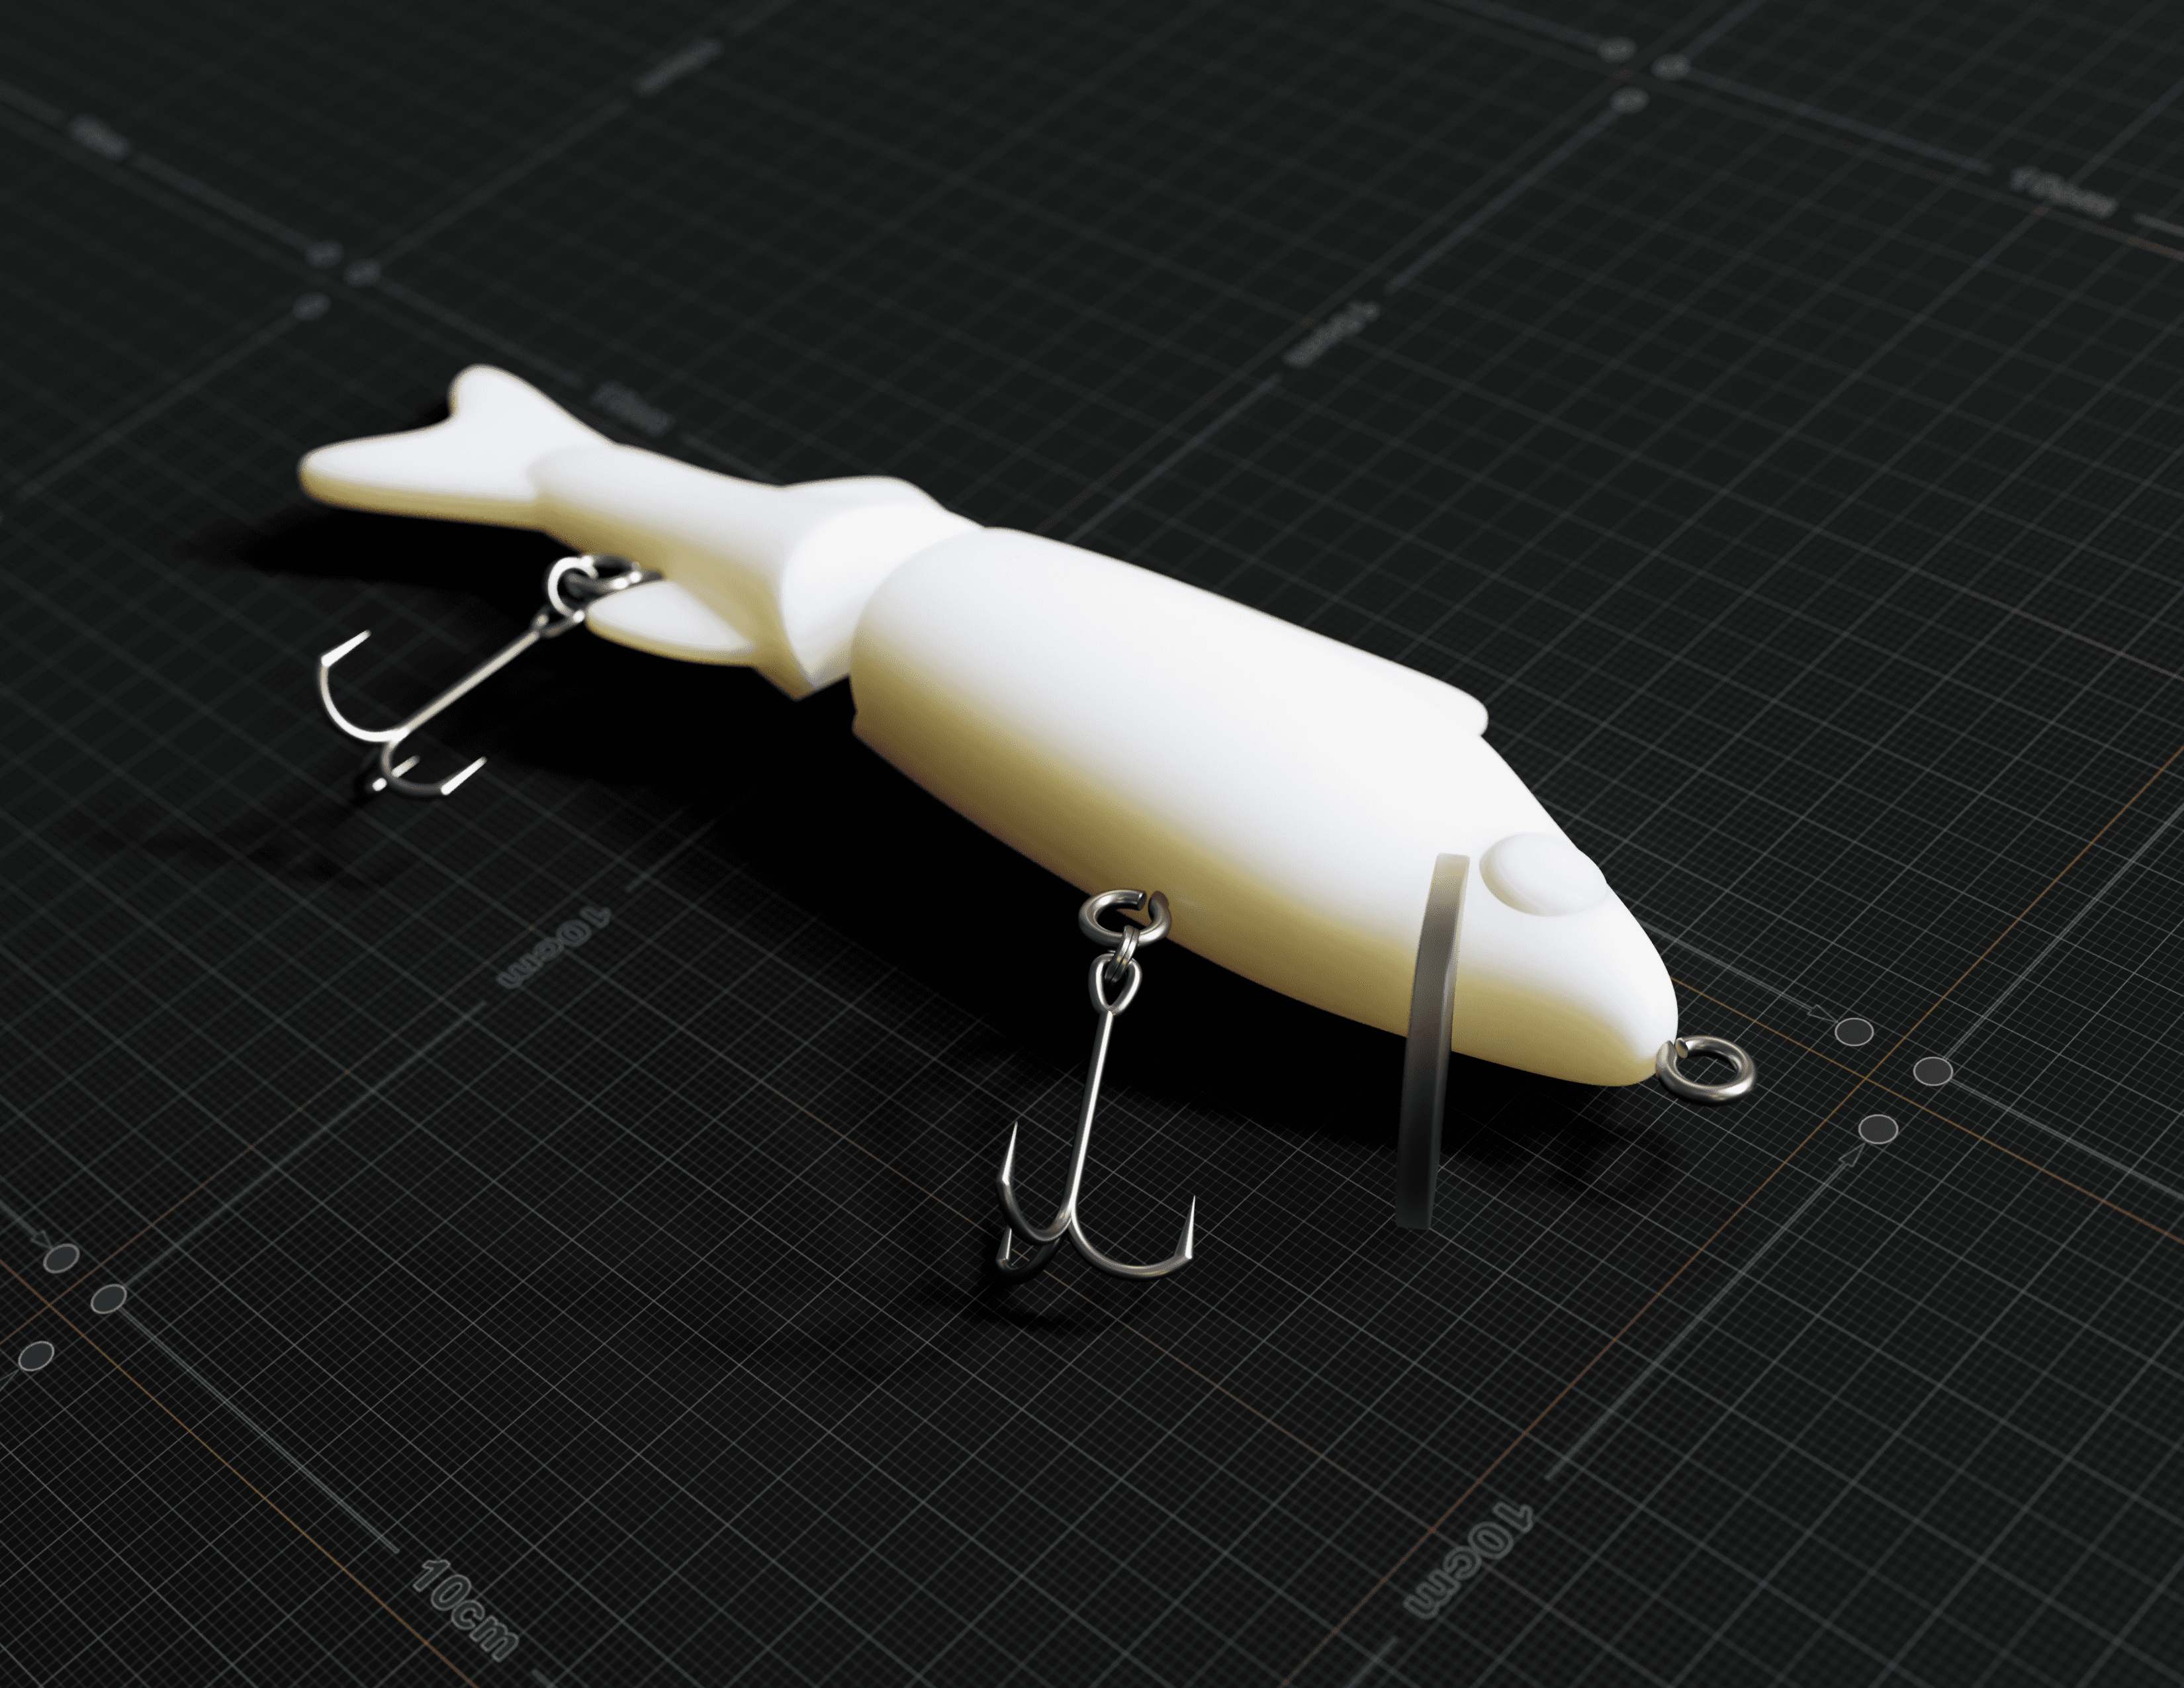 Swimbait Fishing Lure #OutdoorThangs - 3D model by liammccrindle01 on Thangs